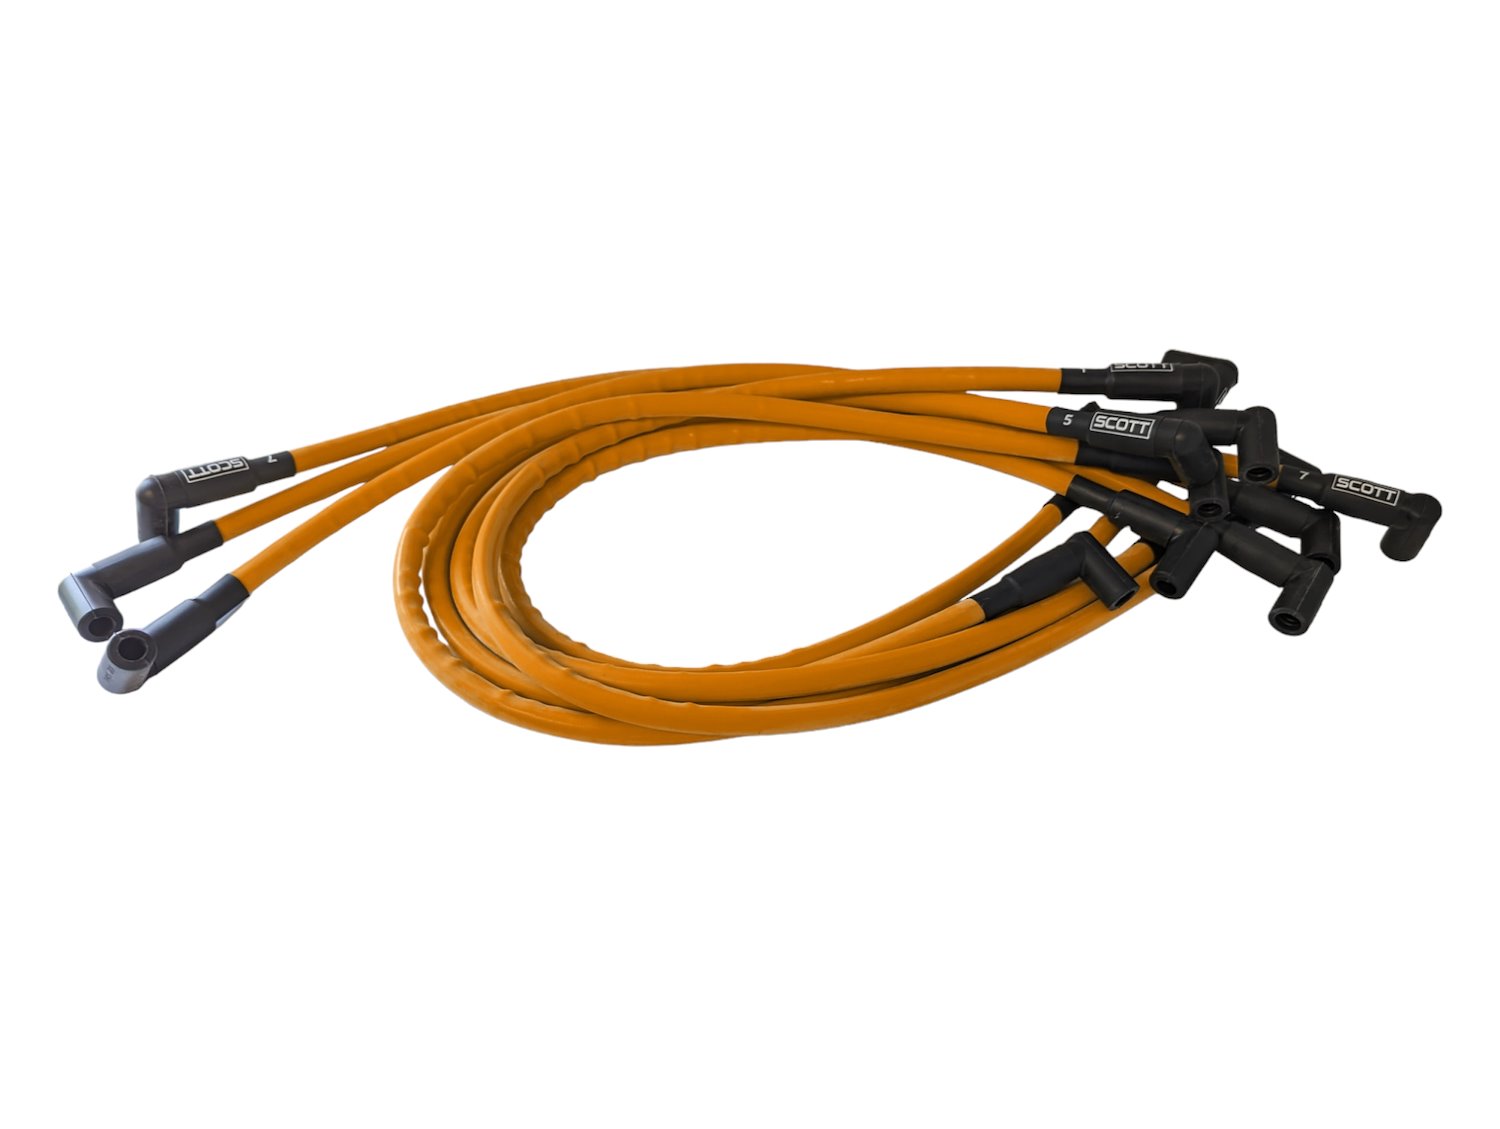 SPW-CH-439-5 High-Performance Silicone-Sleeved Spark Plug Wire Set for Small Block Ford, Under Header [Orange]